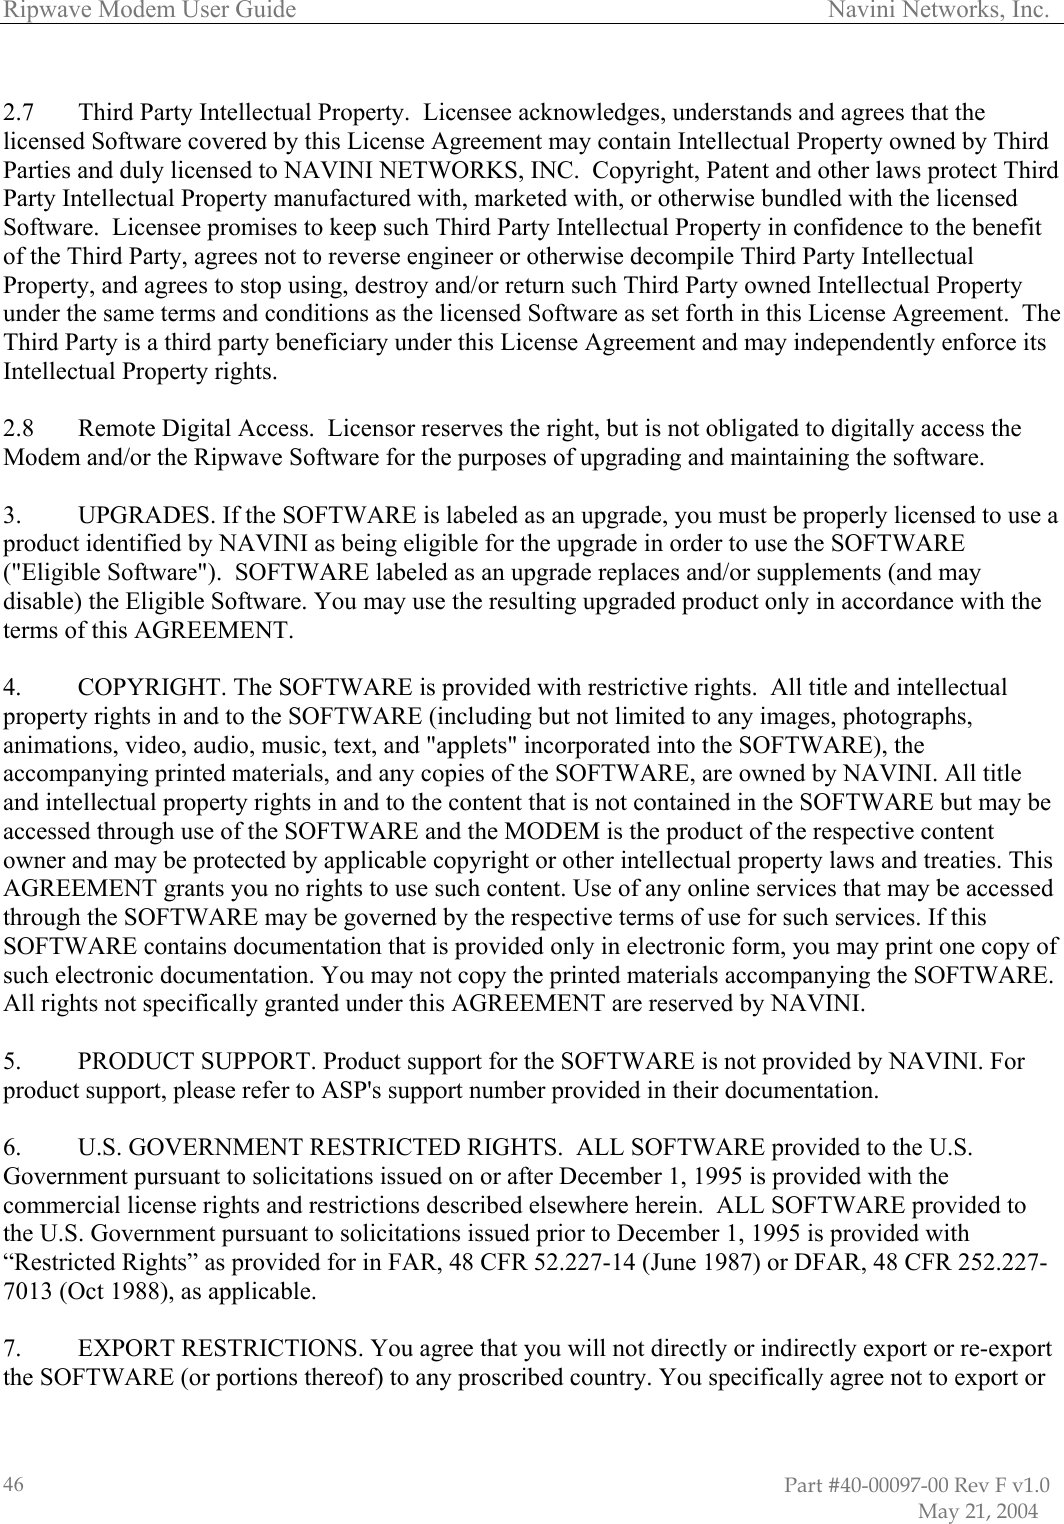 Ripwave Modem User Guide                                                                                     Navini Networks, Inc.  2.7 Third Party Intellectual Property.  Licensee acknowledges, understands licensed Software covered by this License AgreemenP  and agrees that the t may contain Intellectual Property owned by Third arties and duly licensed to NAVINI NETWORKS, INC.  Copyright, Patent and other laws protect Third efit roperty, and agrees to stop using, destroy and/or return such Third Party owned Intellectual Property th in this License Agreement.  The hird Party is a third party beneficiary under this License Agreement and may independently enforce its  .  UPGRADES. If the SOFTWARE is labeled as an upgrade, you must be properly licensed to use a   y in accordance with the rms of this AGREEMENT.  he SOFTWARE is provided with restrictive rights.  All title and intellectual roperty rights in and to the SOFTWARE (including but not limited to any images, photographs, atiFTWARE but may be ccessed through use of the SOFTWARE and the MODEM is the product of the respective content s. This  his AGREEMENT are reserved by NAVINI. I. For ort number provided in their documentation. 6.  U.S. GOVERNMENT RESTRICTED RIGHTS.  ALL SOFTWARE provided to the U.S. Government pursuant to solicitations issued on or after December 1, 1995 is provided with the commercial license rights and restrictions described elsewhere herein.  ALL SOFTWARE provided to the U.S. Government pursuant to solicitations issued prior to December 1, 1995 is provided with “Restricted Rights” as provided for in FAR, 48 CFR 52.227-14 (June 1987) or DFAR, 48 CFR 252.227-7013 (Oct 1988), as applicable.  7.  EXPORT RESTRICTIONS. You agree that you will not directly or indirectly export or re-export the SOFTWARE (or portions thereof) to any proscribed country. You specifically agree not to export or Party Intellectual Property manufactured with, marketed with, or otherwise bundled with the licensed Software.  Licensee promises to keep such Third Party Intellectual Property in confidence to the benof the Third Party, agrees not to reverse engineer or otherwise decompile Third Party Intellectual Punder the same terms and conditions as the licensed Software as set forTIntellectual Property rights.  2.8  Remote Digital Access.  Licensor reserves the right, but is not obligated to digitally access theModem and/or the Ripwave Software for the purposes of upgrading and maintaining the software.  3product identified by NAVINI as being eligible for the upgrade in order to use the SOFTWARE(&quot;Eligible Software&quot;).  SOFTWARE labeled as an upgrade replaces and/or supplements (and maydisable) the Eligible Software. You may use the resulting upgraded product onlte 4.  COPYRIGHT. Tpanim ons, video, audio, music, text, and &quot;applets&quot; incorporated into the SOFTWARE), the accompanying printed materials, and any copies of the SOFTWARE, are owned by NAVINI. All title and intellectual property rights in and to the content that is not contained in the SOaowner and may be protected by applicable copyright or other intellectual property laws and treatieAGREEMENT grants you no rights to use such content. Use of any online services that may be accessed through the SOFTWARE may be governed by the respective terms of use for such services. If this SOFTWARE contains documentation that is provided only in electronic form, you may print one copy of such electronic documentation. You may not copy the printed materials accompanying the SOFTWARE.All rights not specifically granted under t 5.  PRODUCT SUPPORT. Product support for the SOFTWARE is not provided by NAVINproduct support, please refer to ASP&apos;s supp                                                                                                                         Part #40-00097-00 Rev F v1.0                           May 21, 2004 46